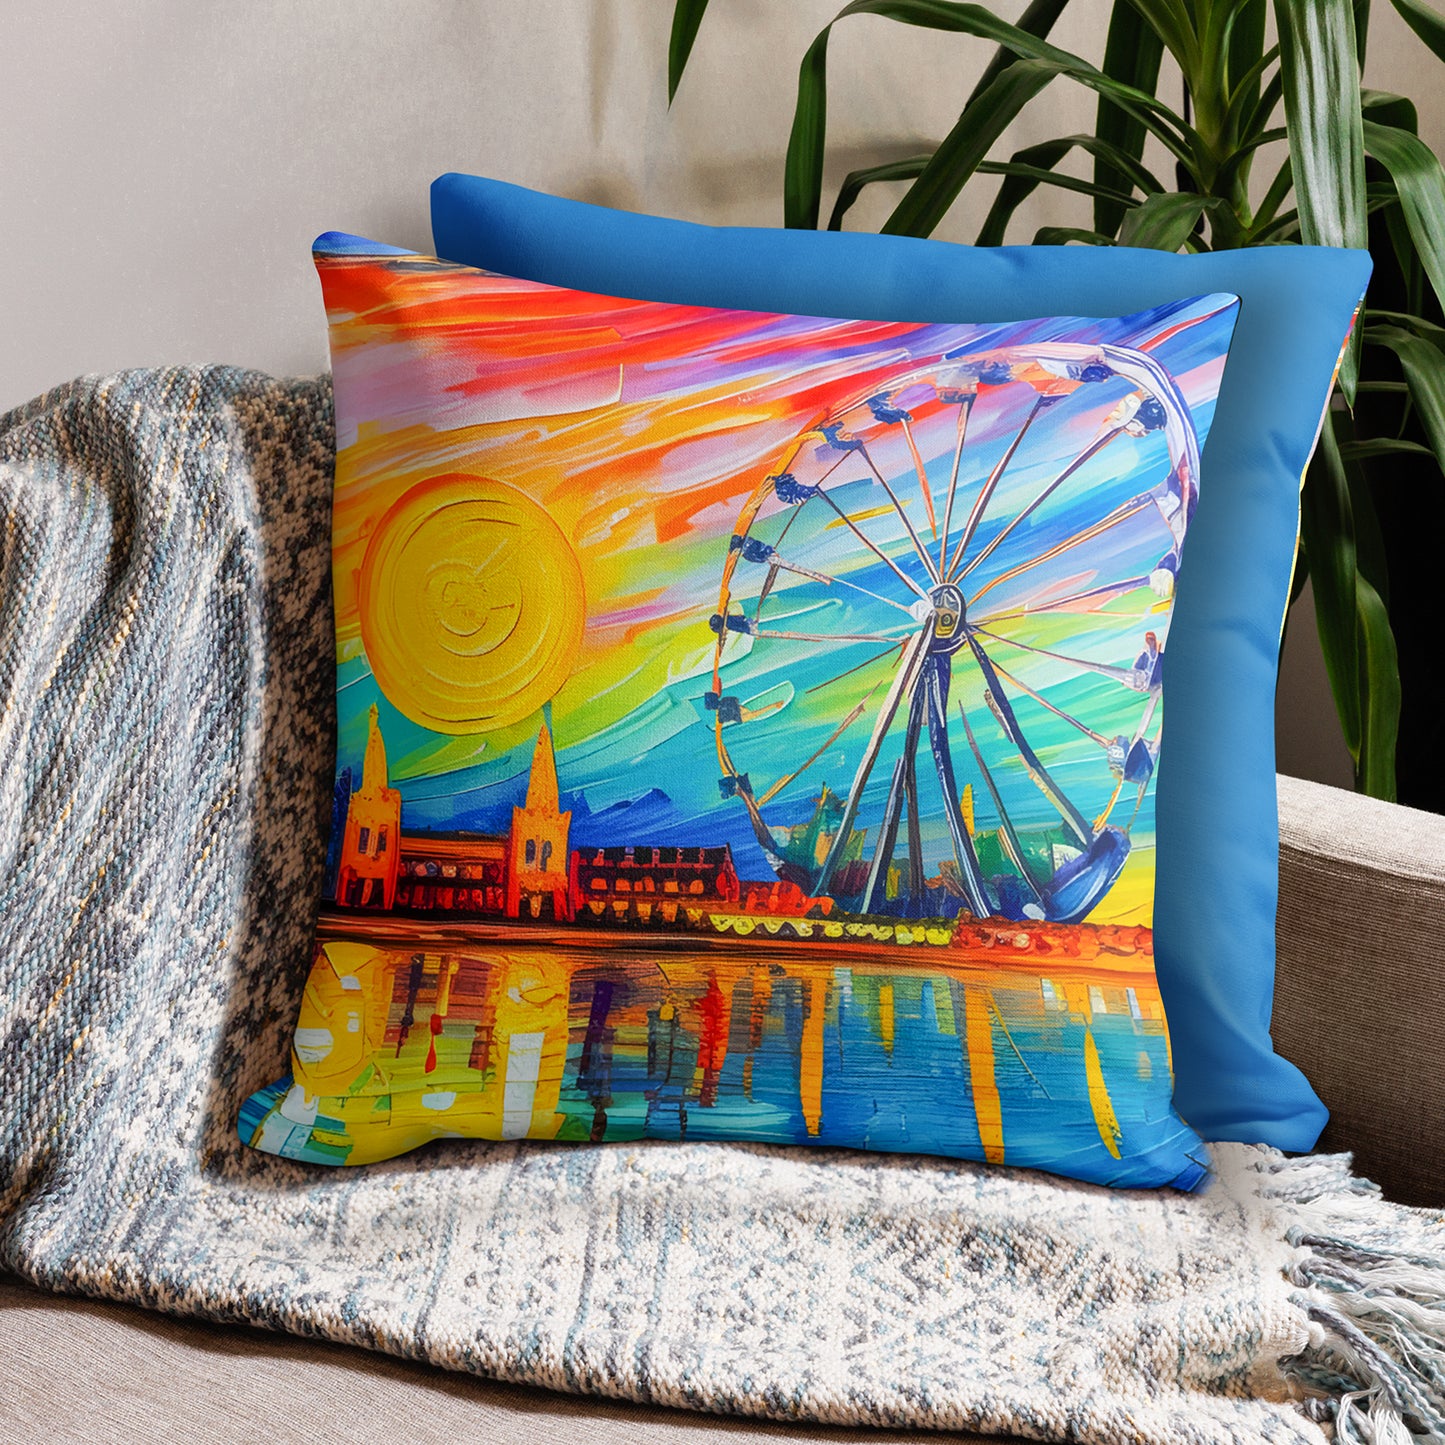 Premium Throw Pillow - Vienna | Add a pop of color and cozy texture to any space